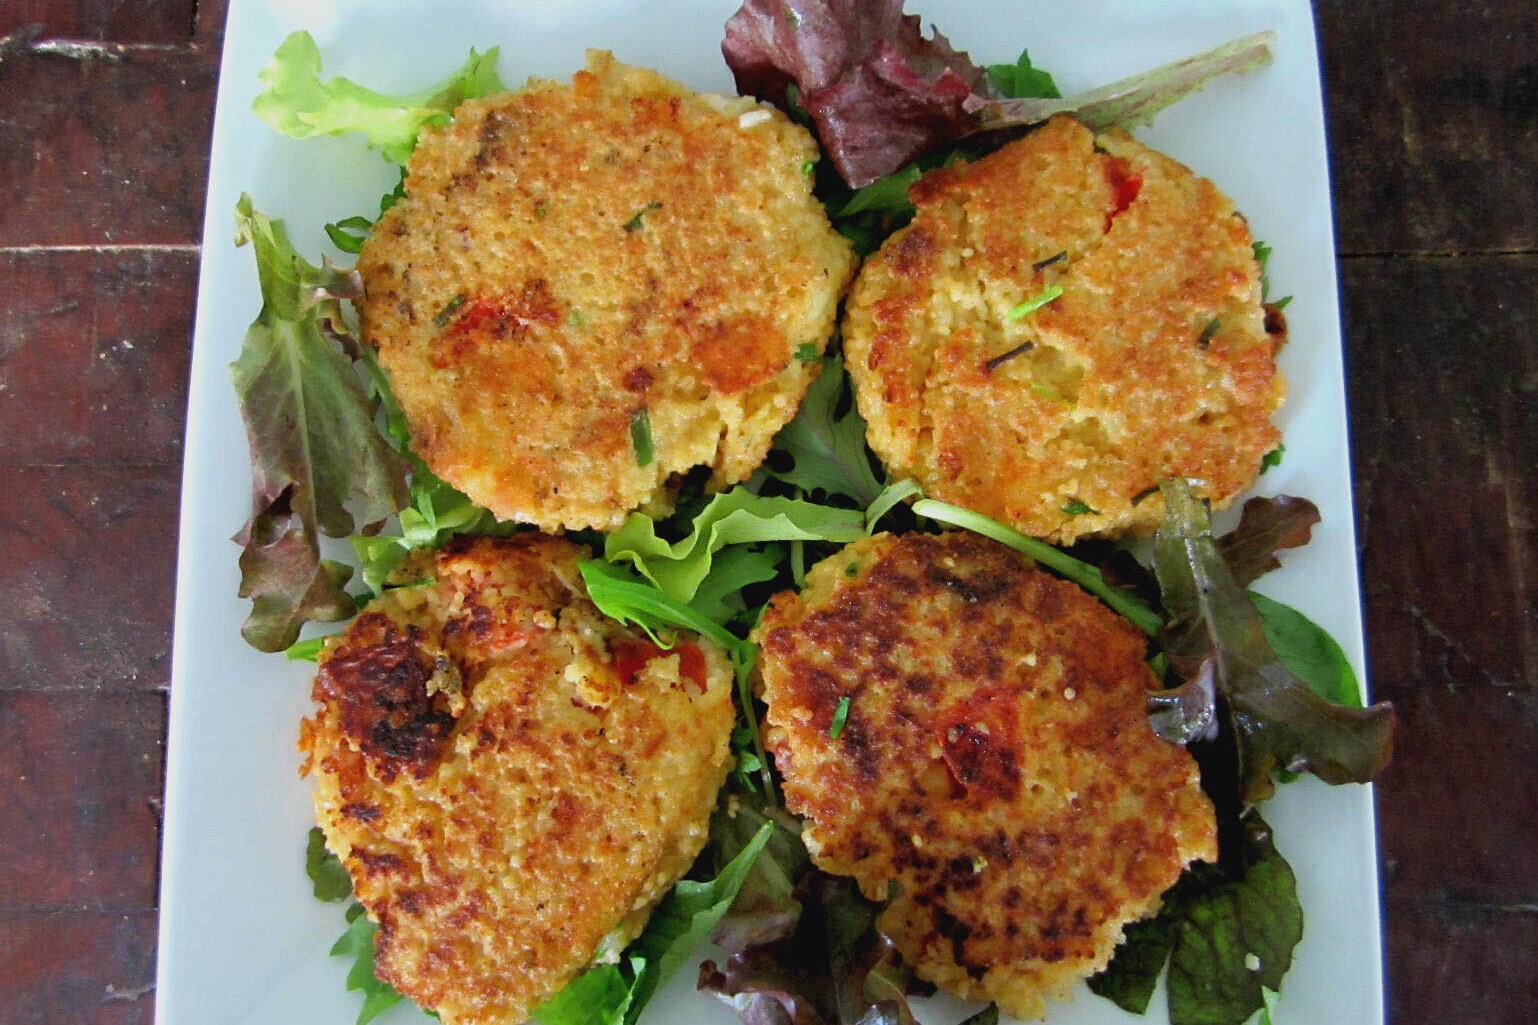 Four tomato whole wheat couscous cakes on a bed of lettuce